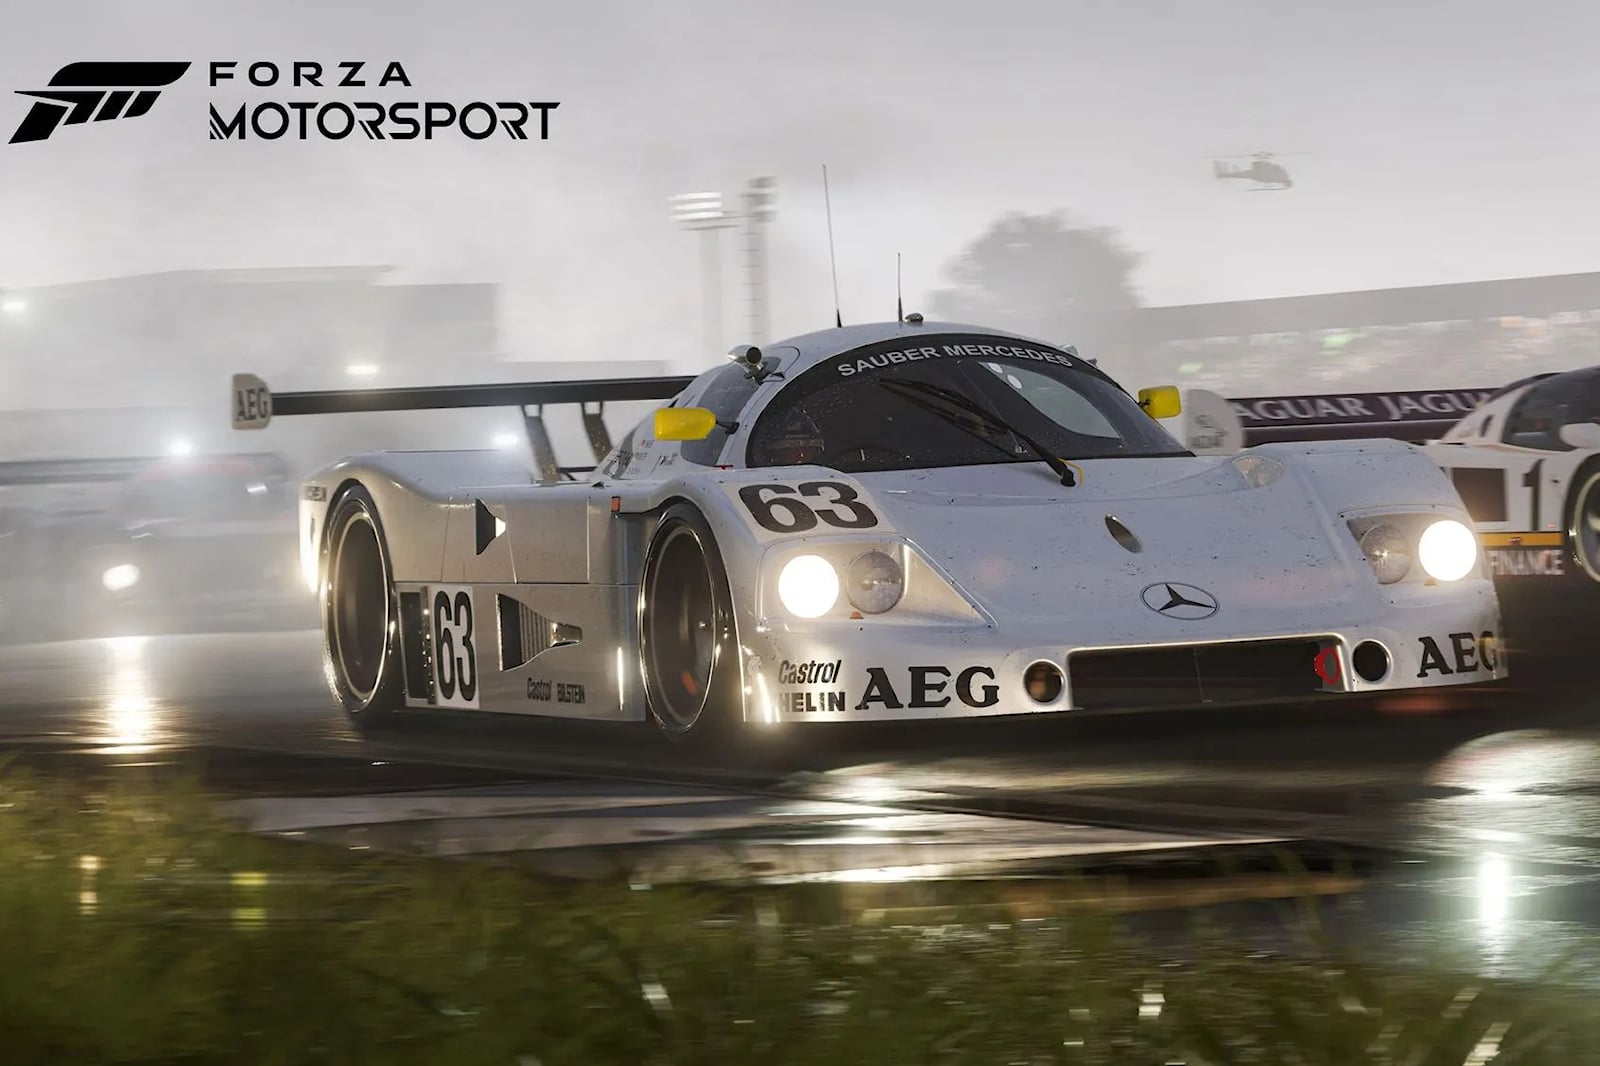 Forza Motorsport review: this long-awaited tune-up delivers